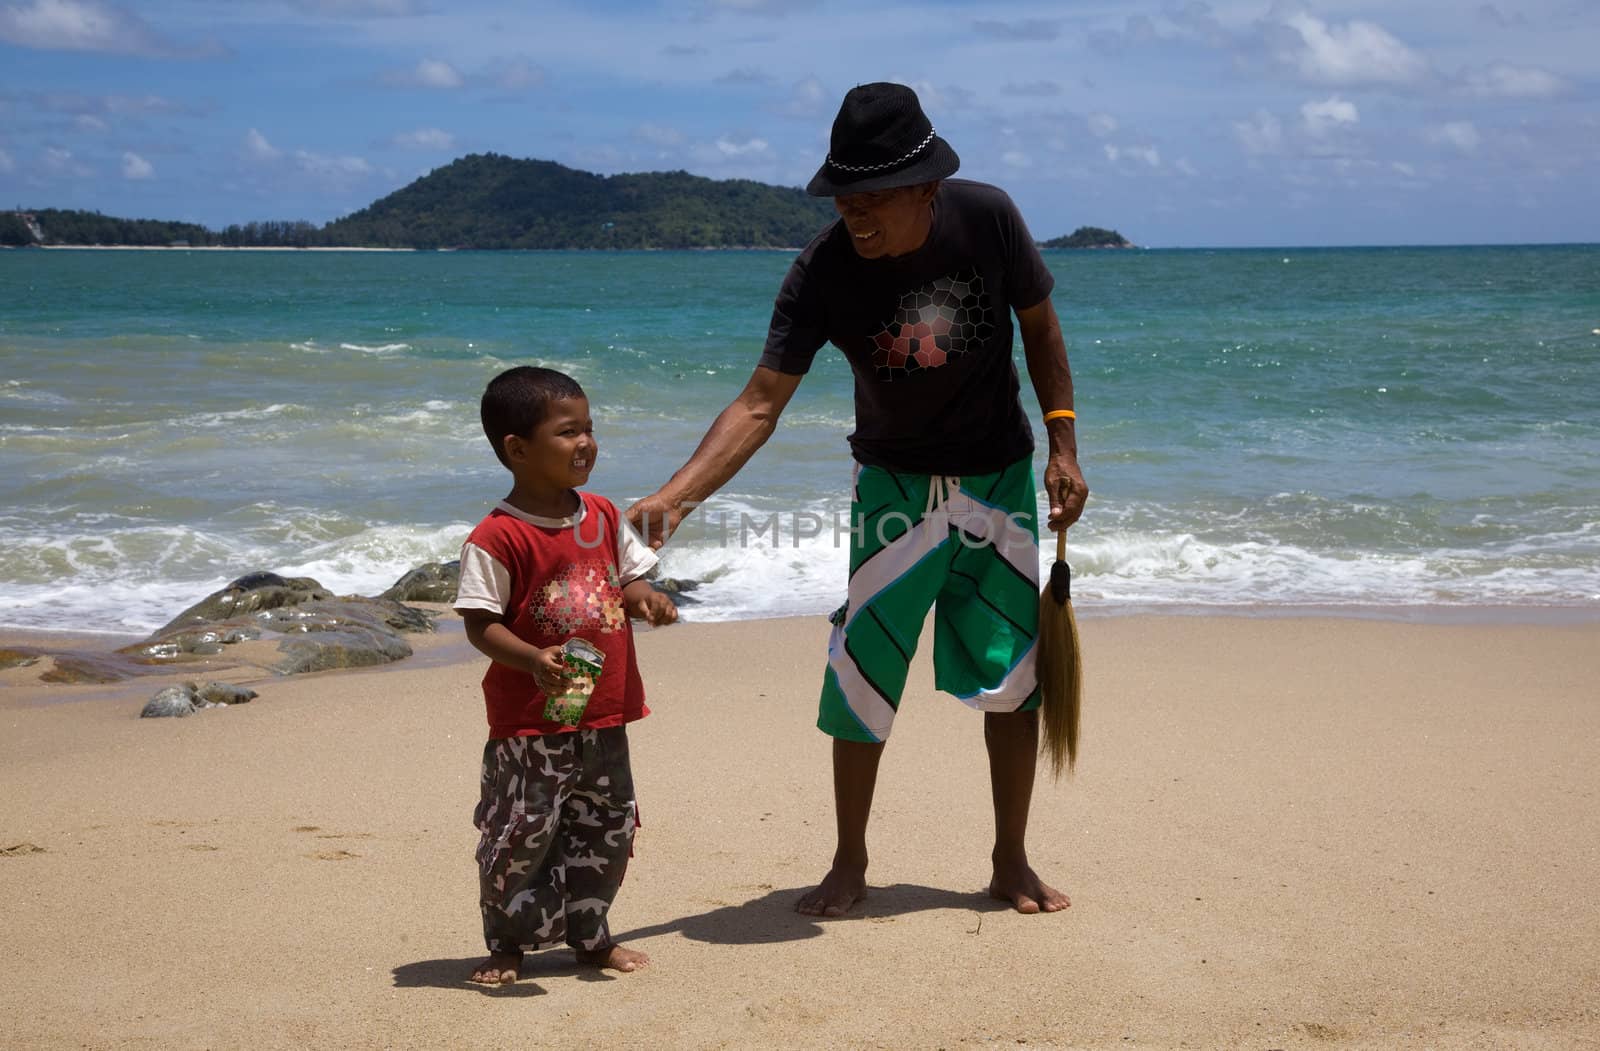 Thailand, Phuket, Patong, Indigenous people: my grandfather with his grandson on the beach